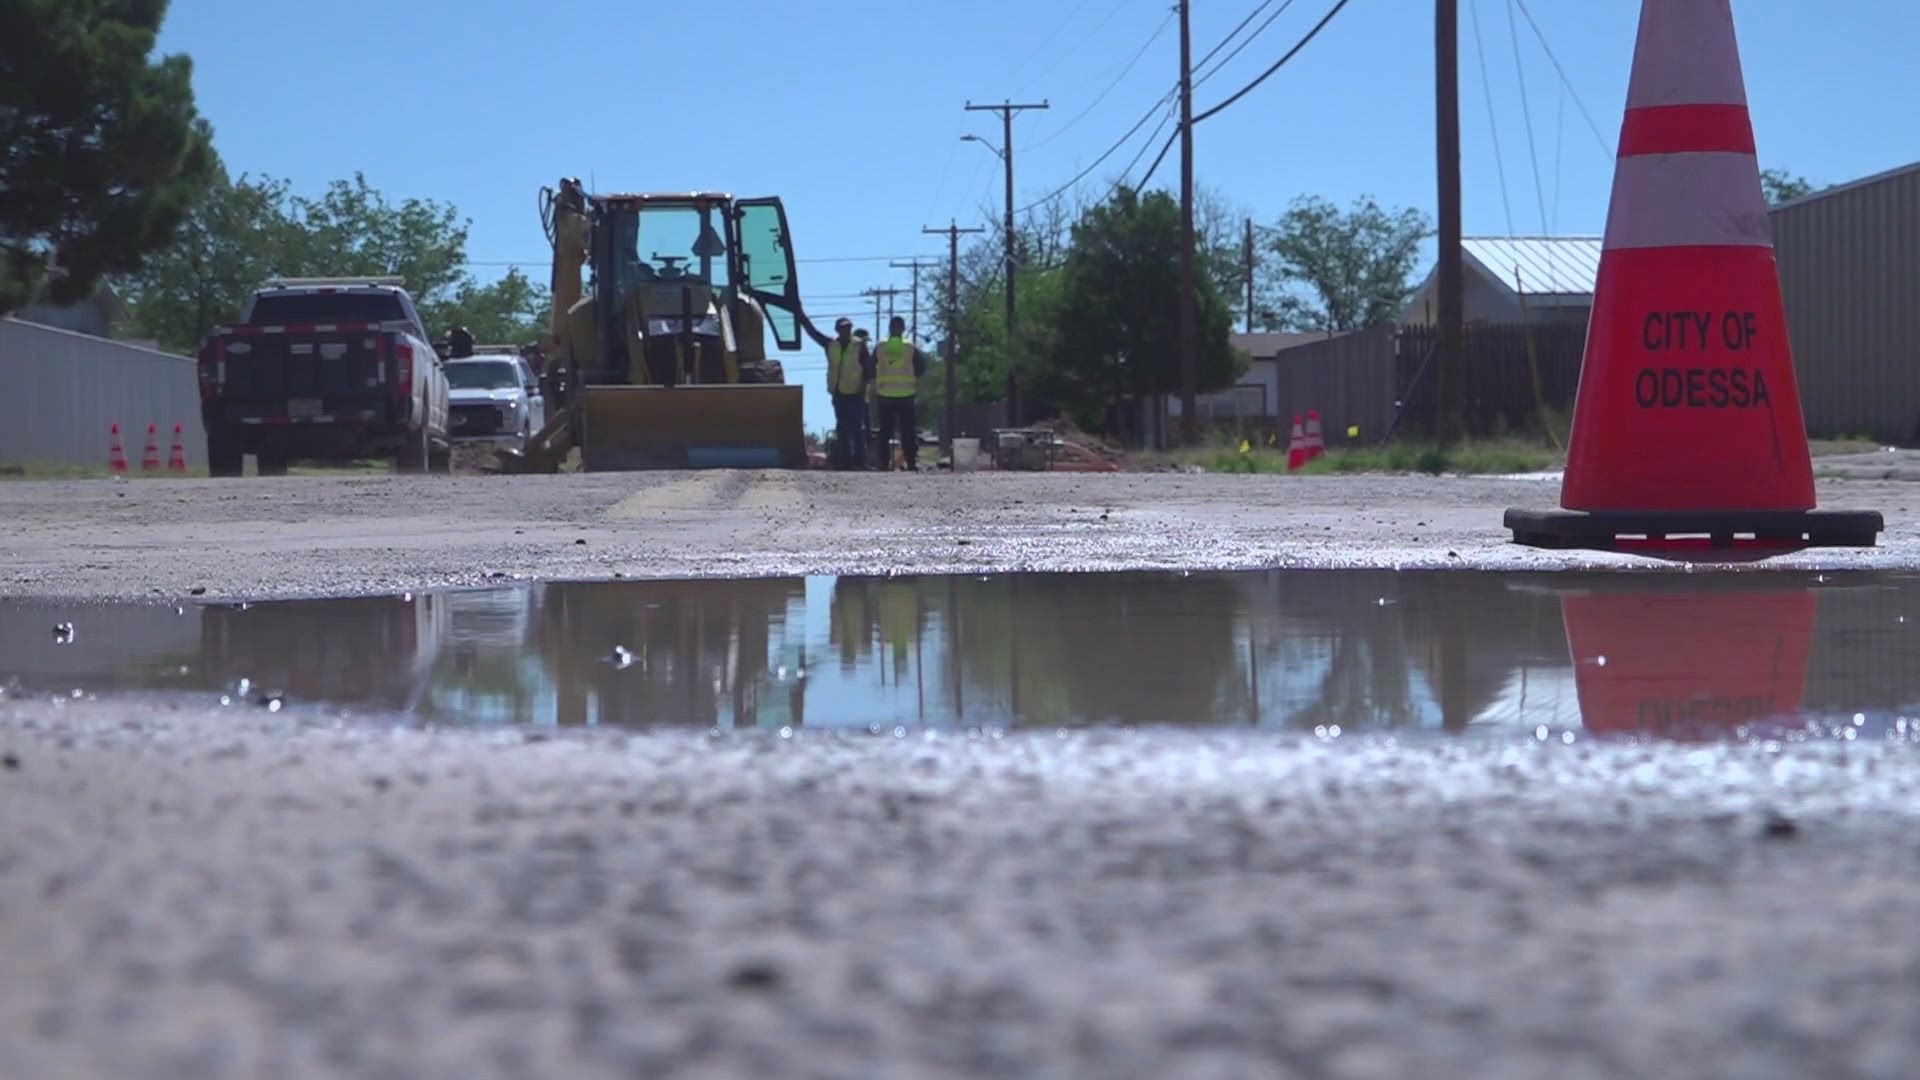 The city is working on bringing back a 'valve crew' that will periodically check valves across Odessa to make sure they are in good working order.